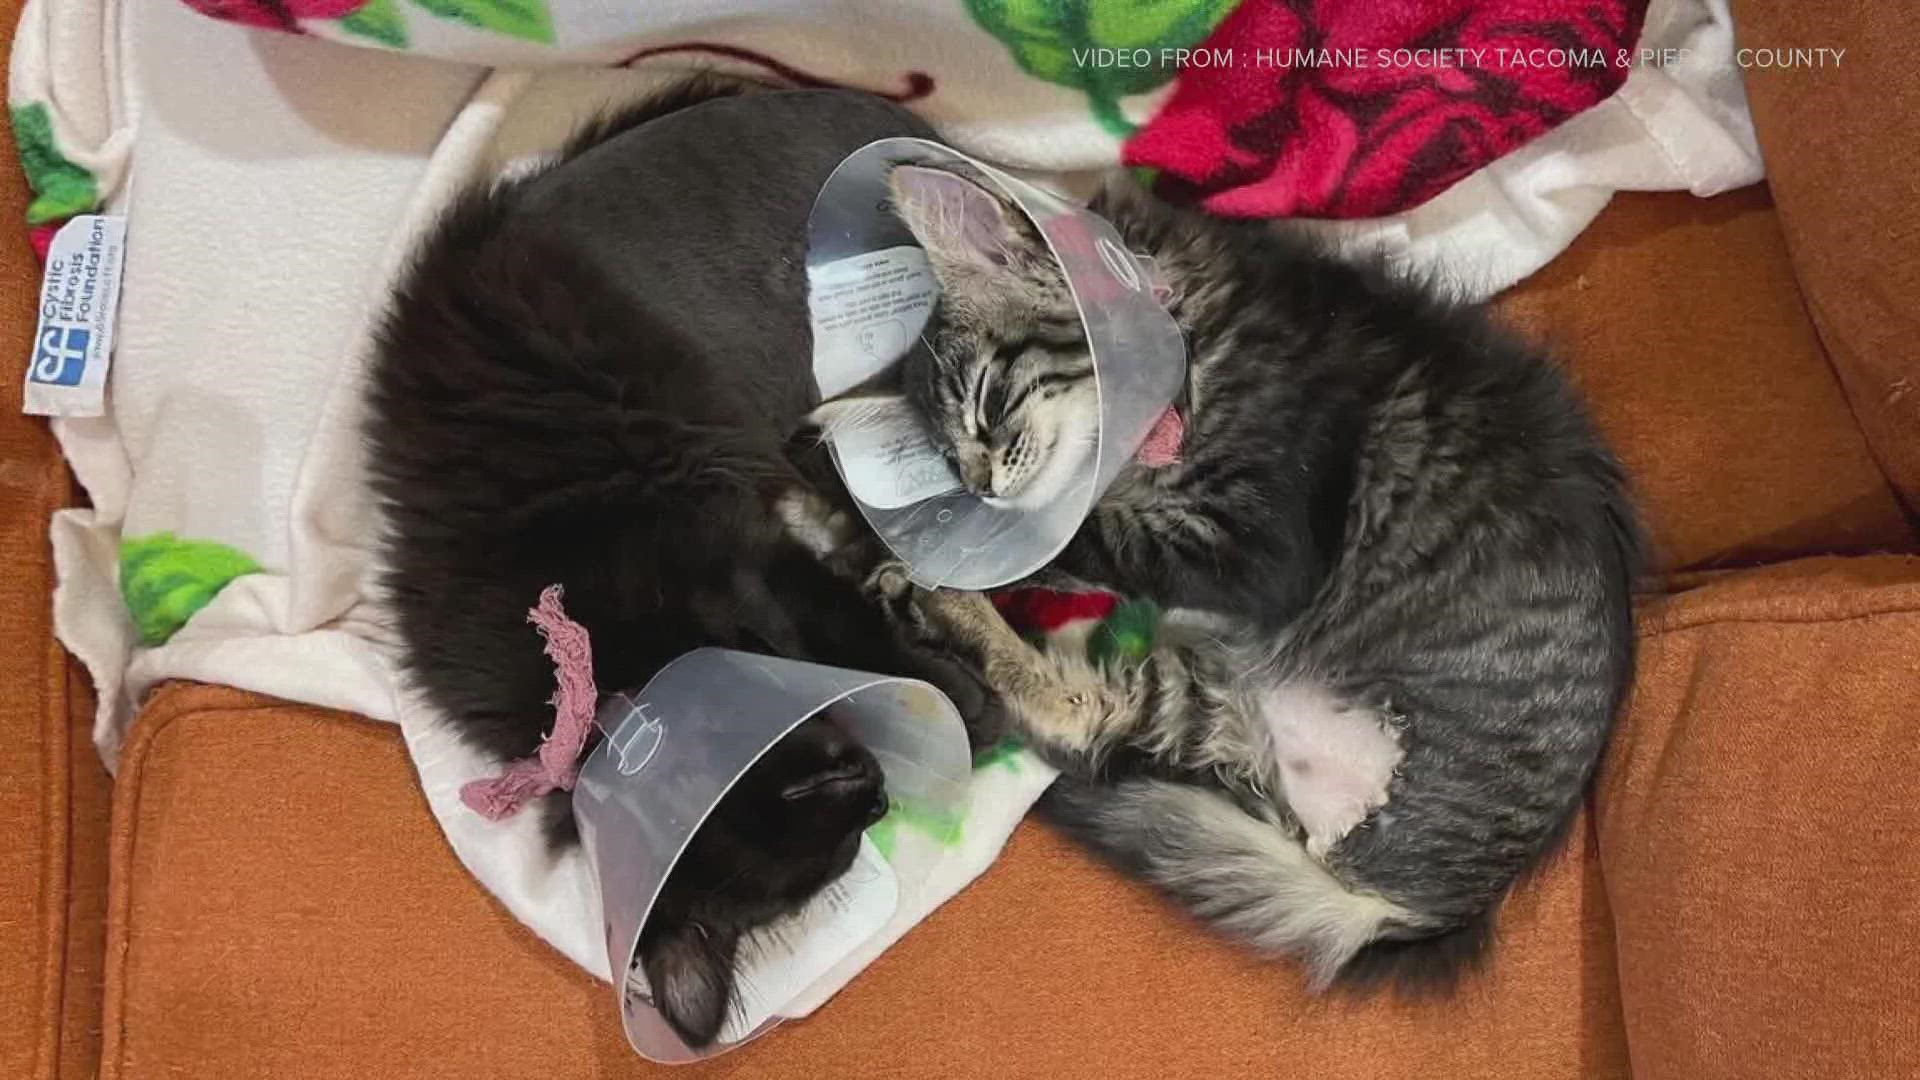 Echo and Foxtrot have found their forever home after receiving life-saving amputations.